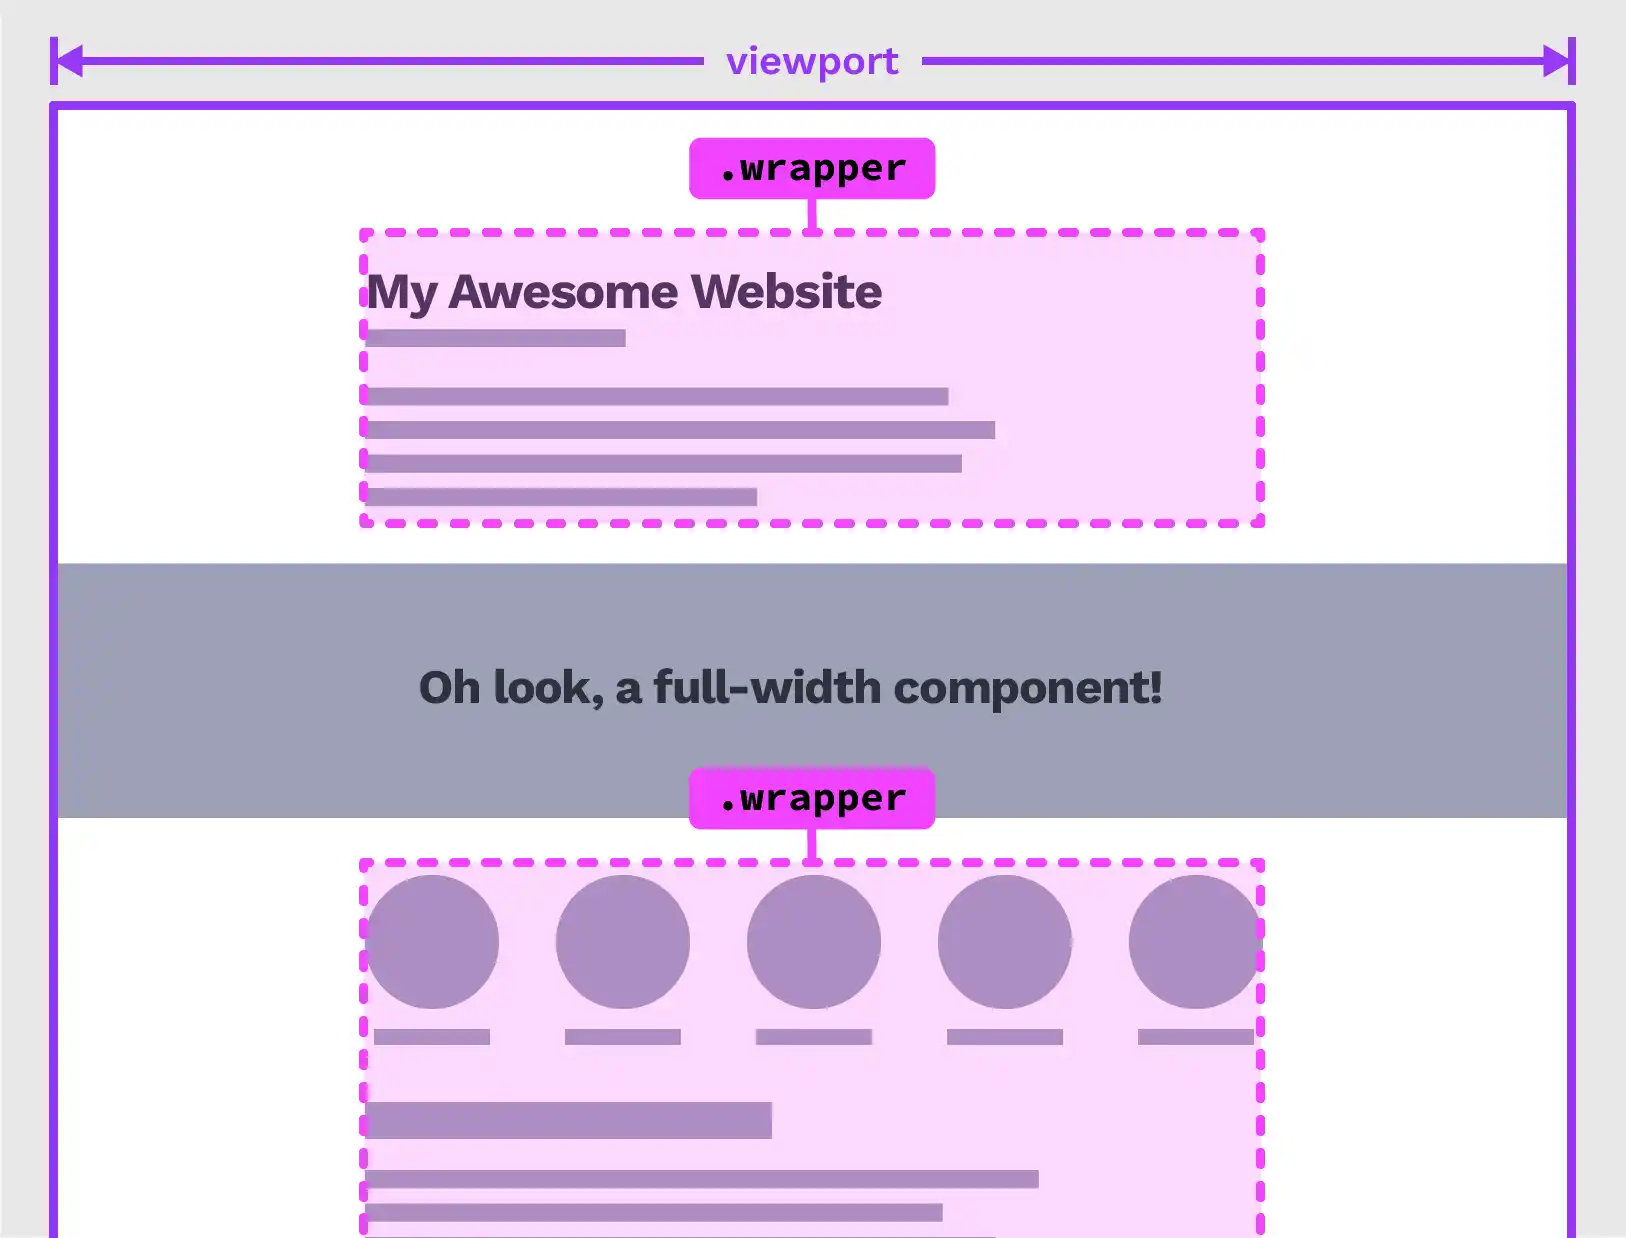 Content above and below the full-width section sits within individual wrapper elements, denoted by a pink dotted line